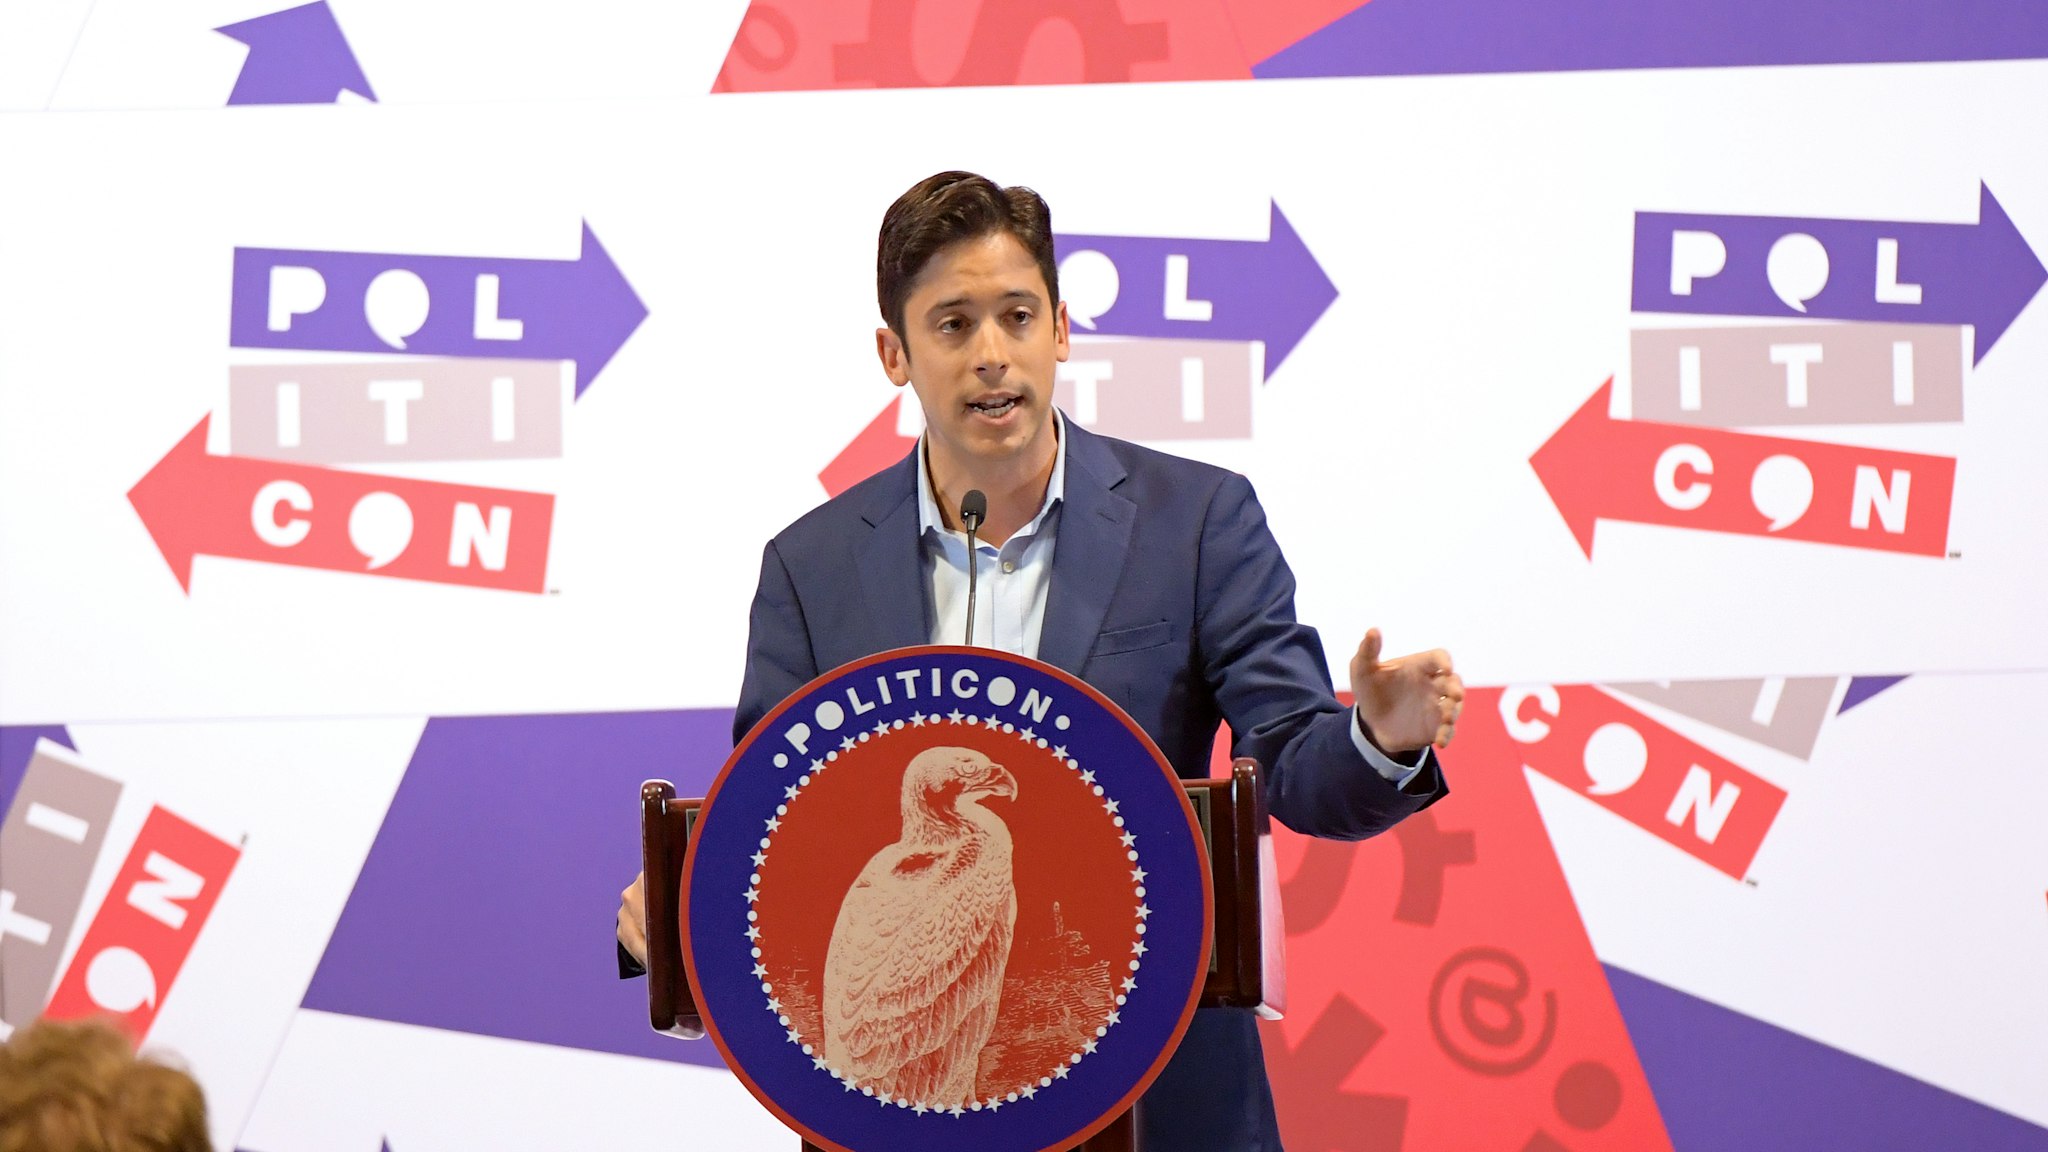 Michael Knowles speaks onstage during day 2 of Politicon 2019 at Music City Center on October 27, 2019 in Nashville, Tennessee. (Photo by Jason Kempin/Getty Images for Politicon )